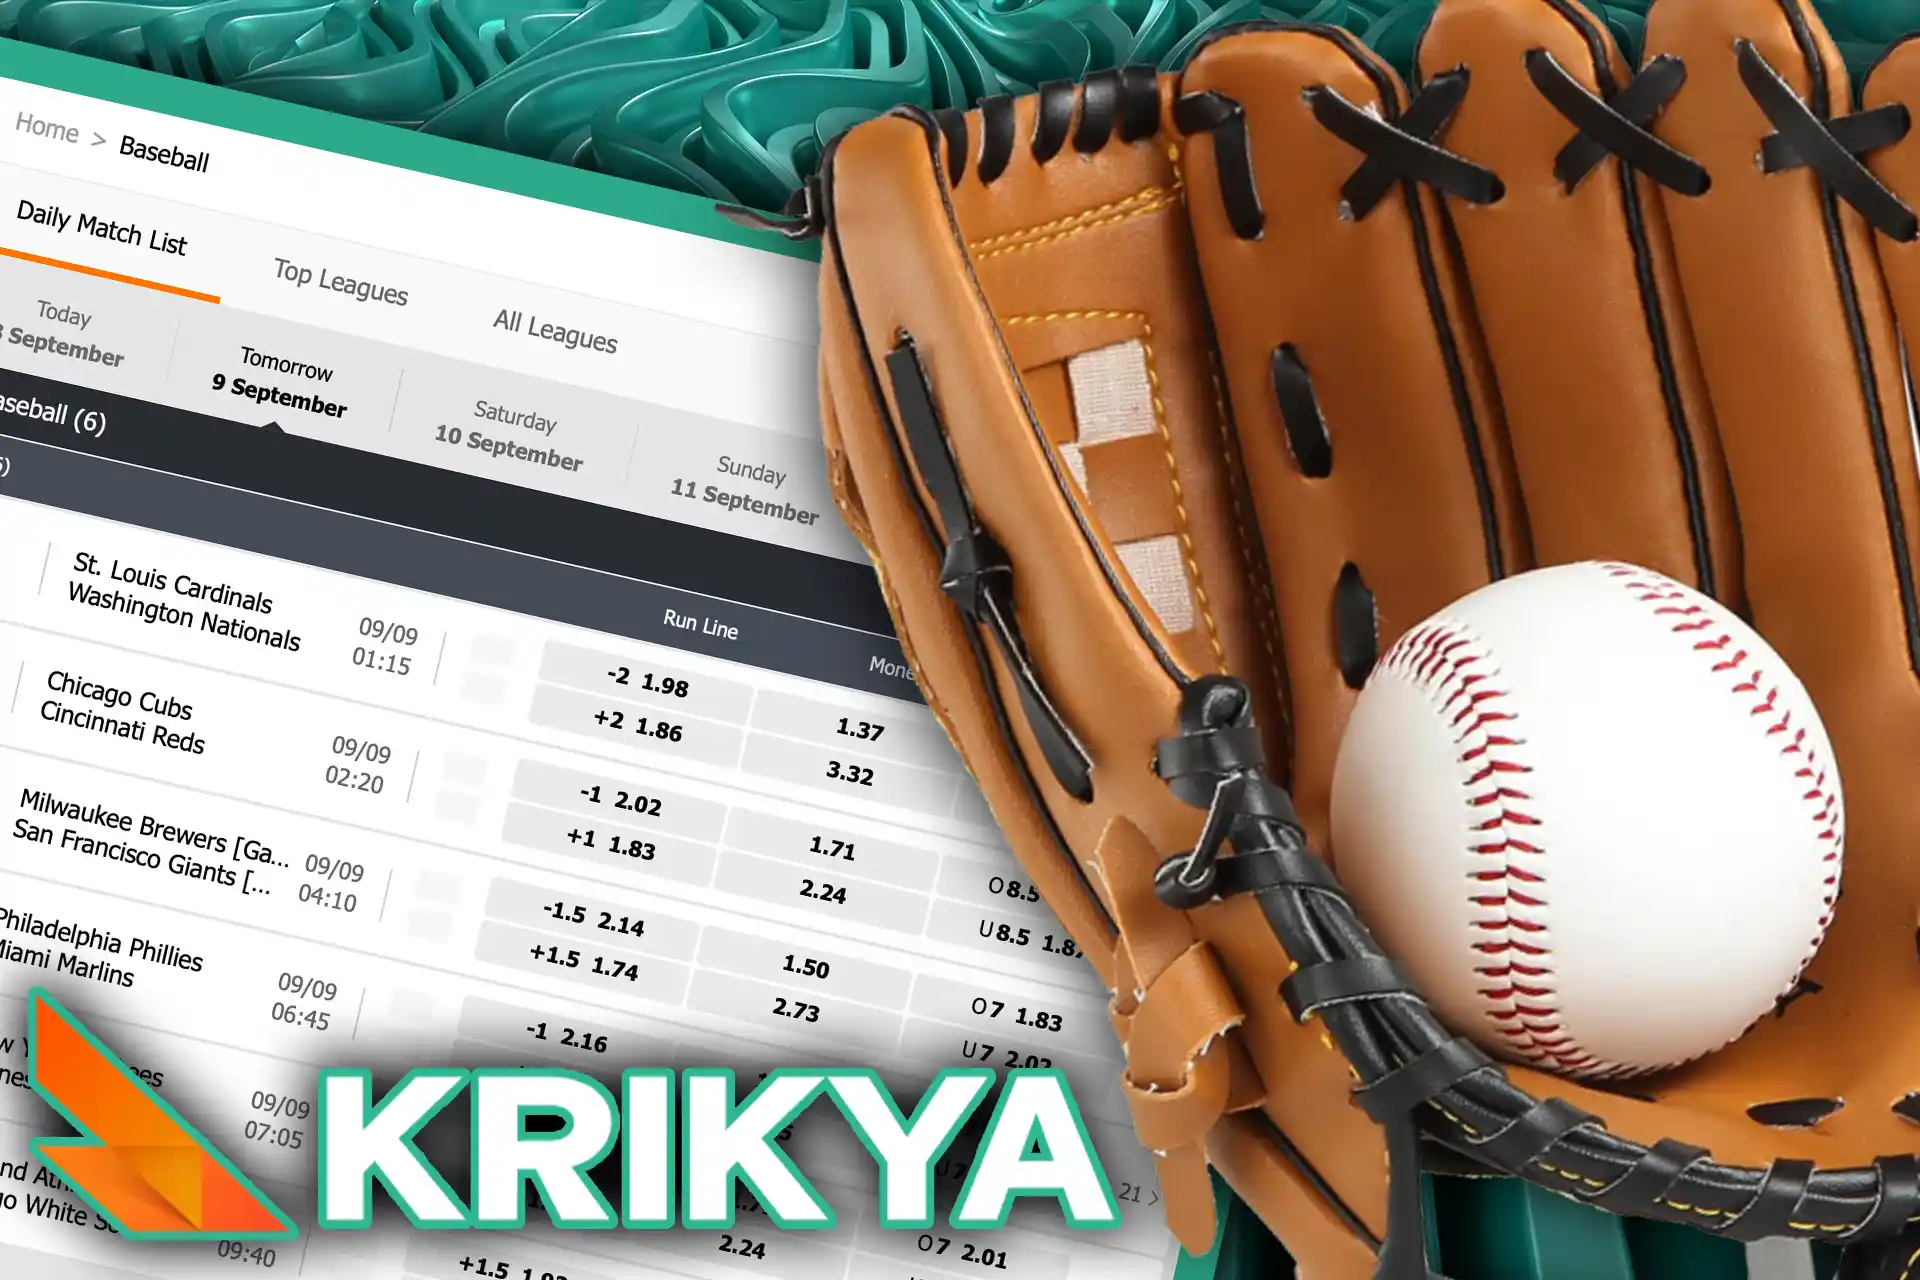 Baseball is another betting opportunity at Krikya.